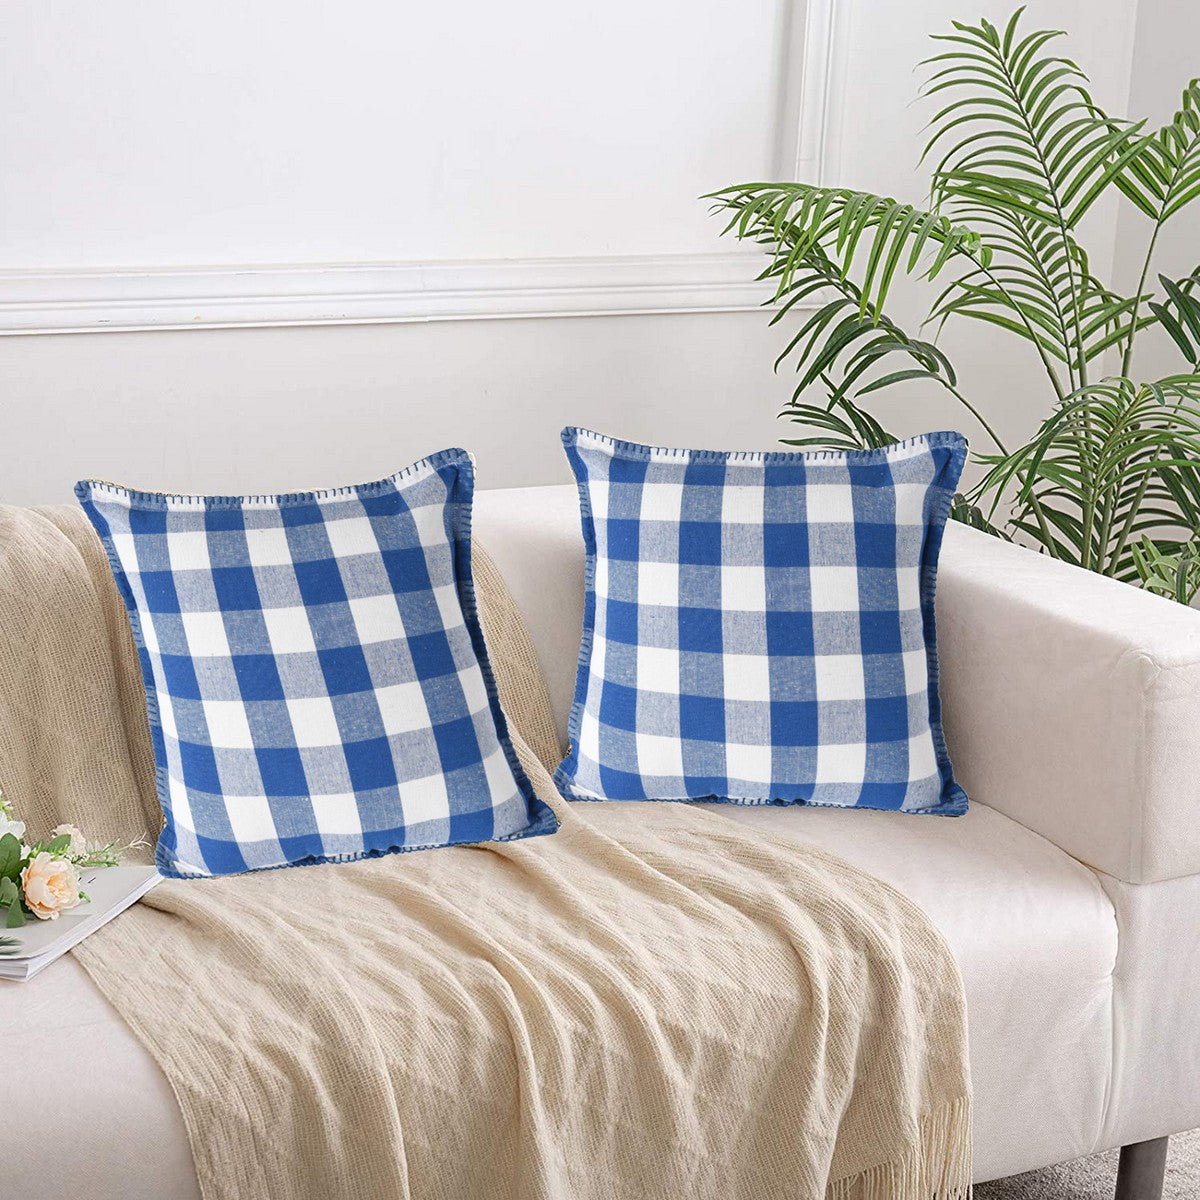 Lushomes Square Cushion Cover with Blanket Stitch, Cotton Sofa Pillow Cover Set of 2, 20x20 Inch, Big Checks, Blue and White Checks, Pillow Cushions Covers (Pack of 2, 50x50 Cms)